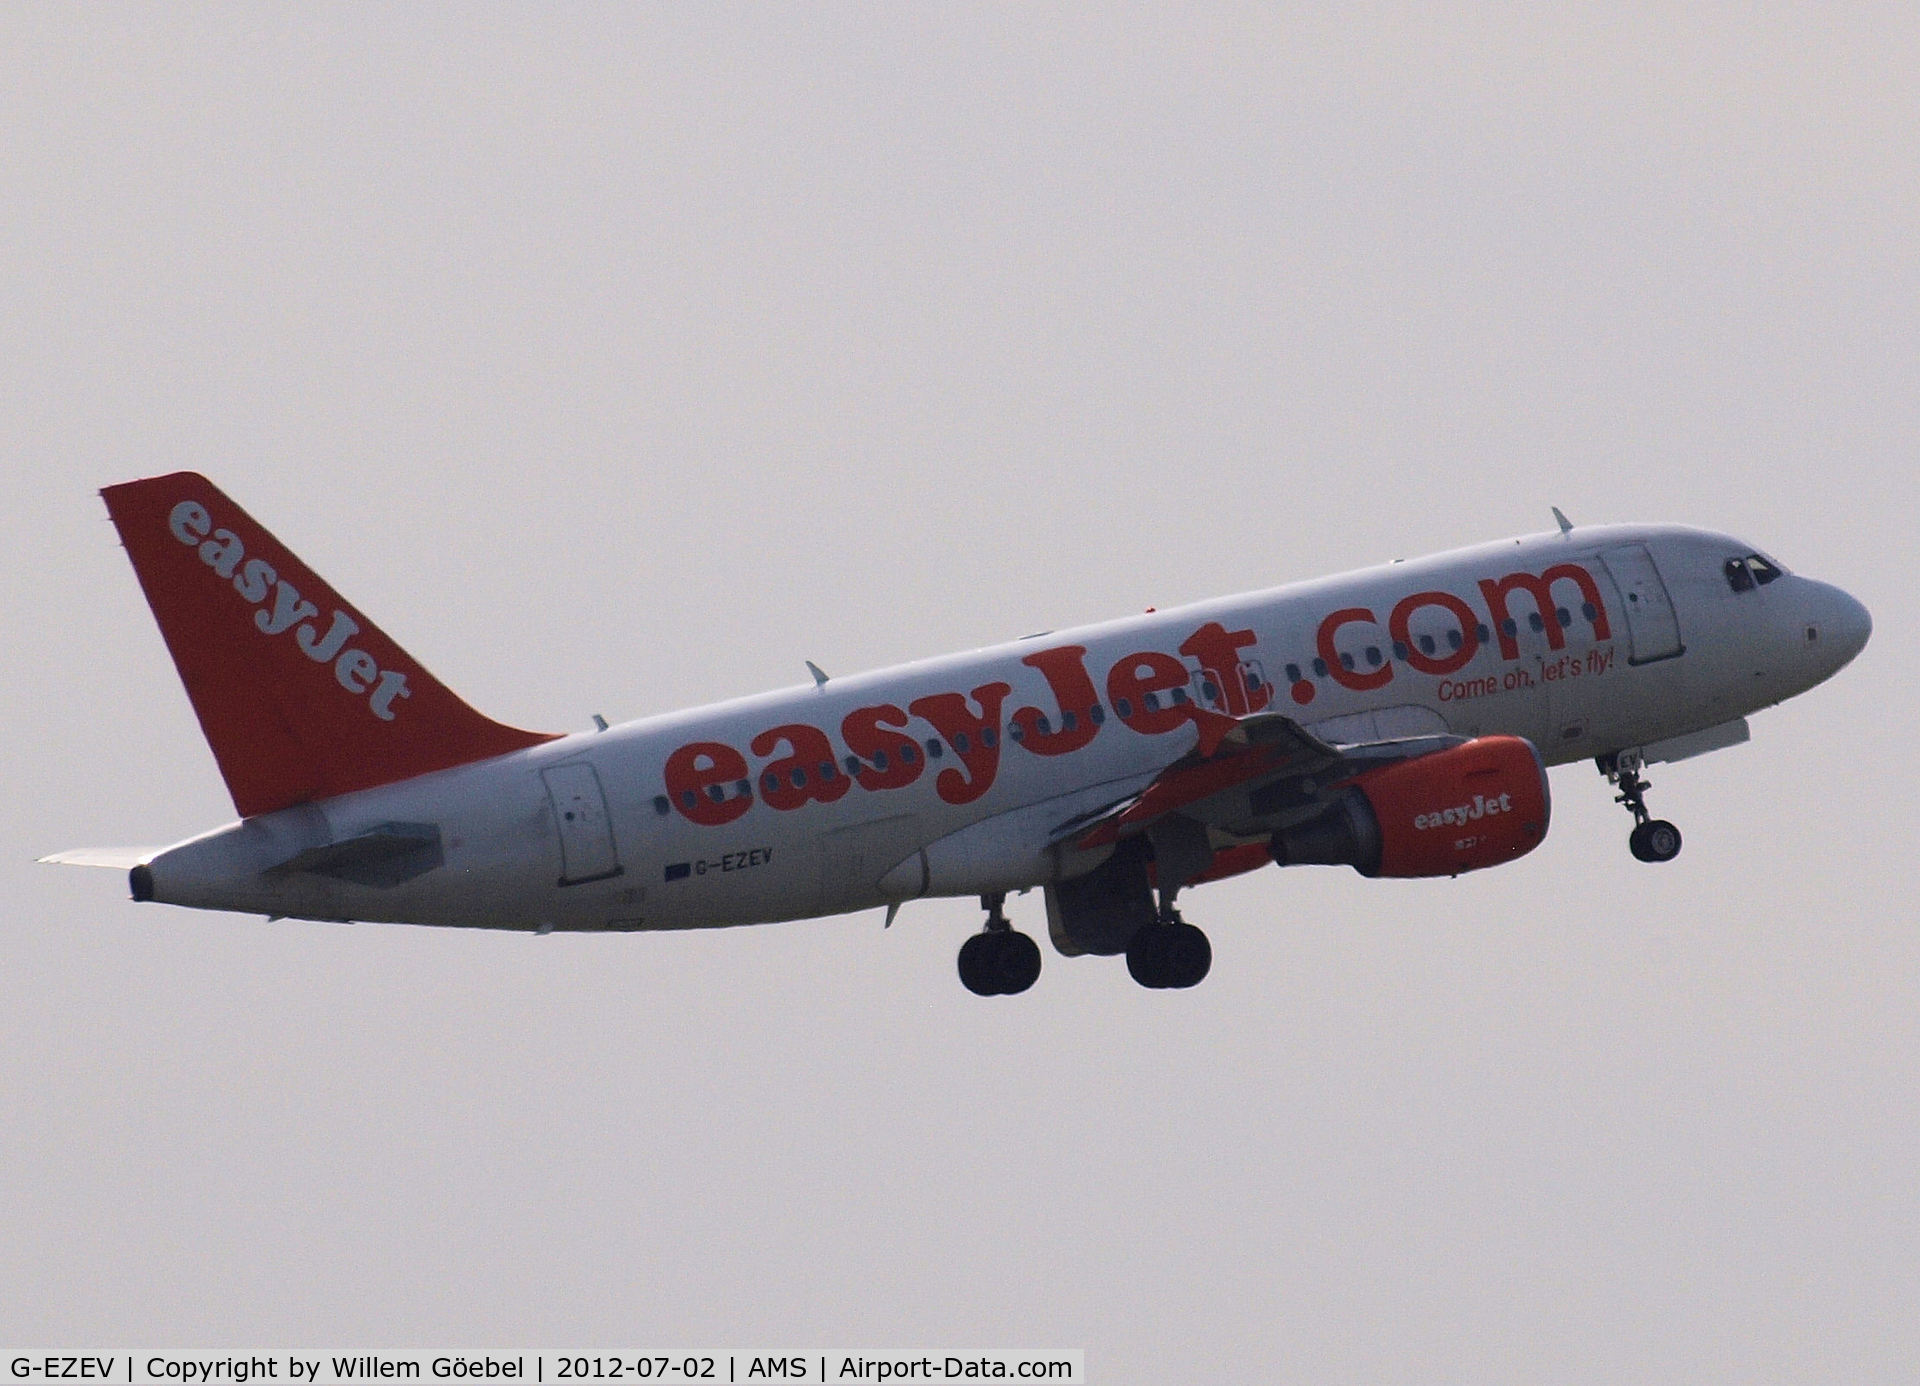 G-EZEV, 2004 Airbus A319-111 C/N 2289, Take off from Schiphol Airport on runway K18